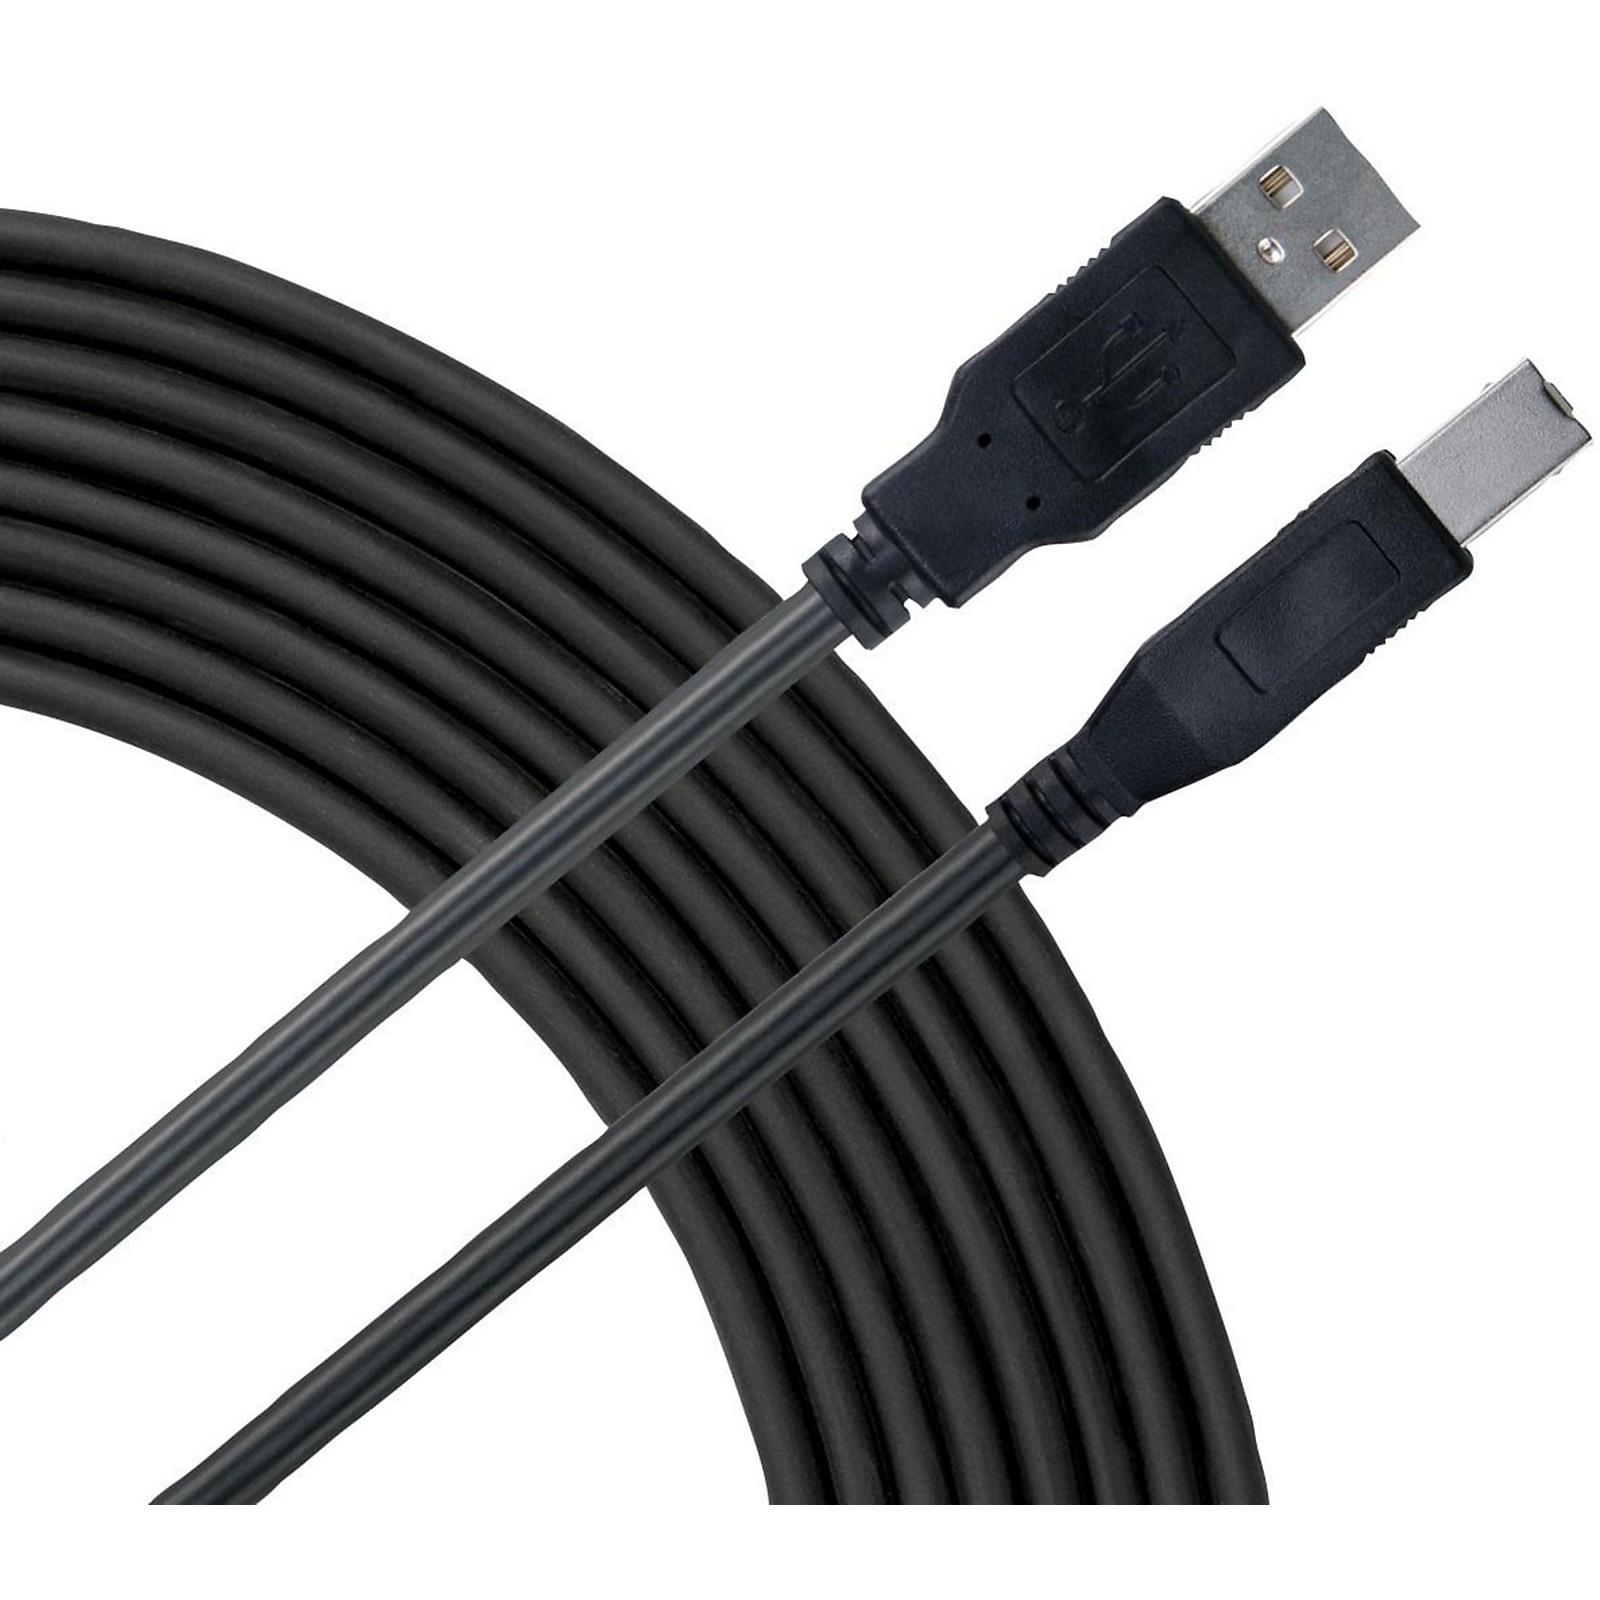 25 Ft USB 2.0 Cable for Audio Interface, Midi Keyboard, USB Microphone Cord